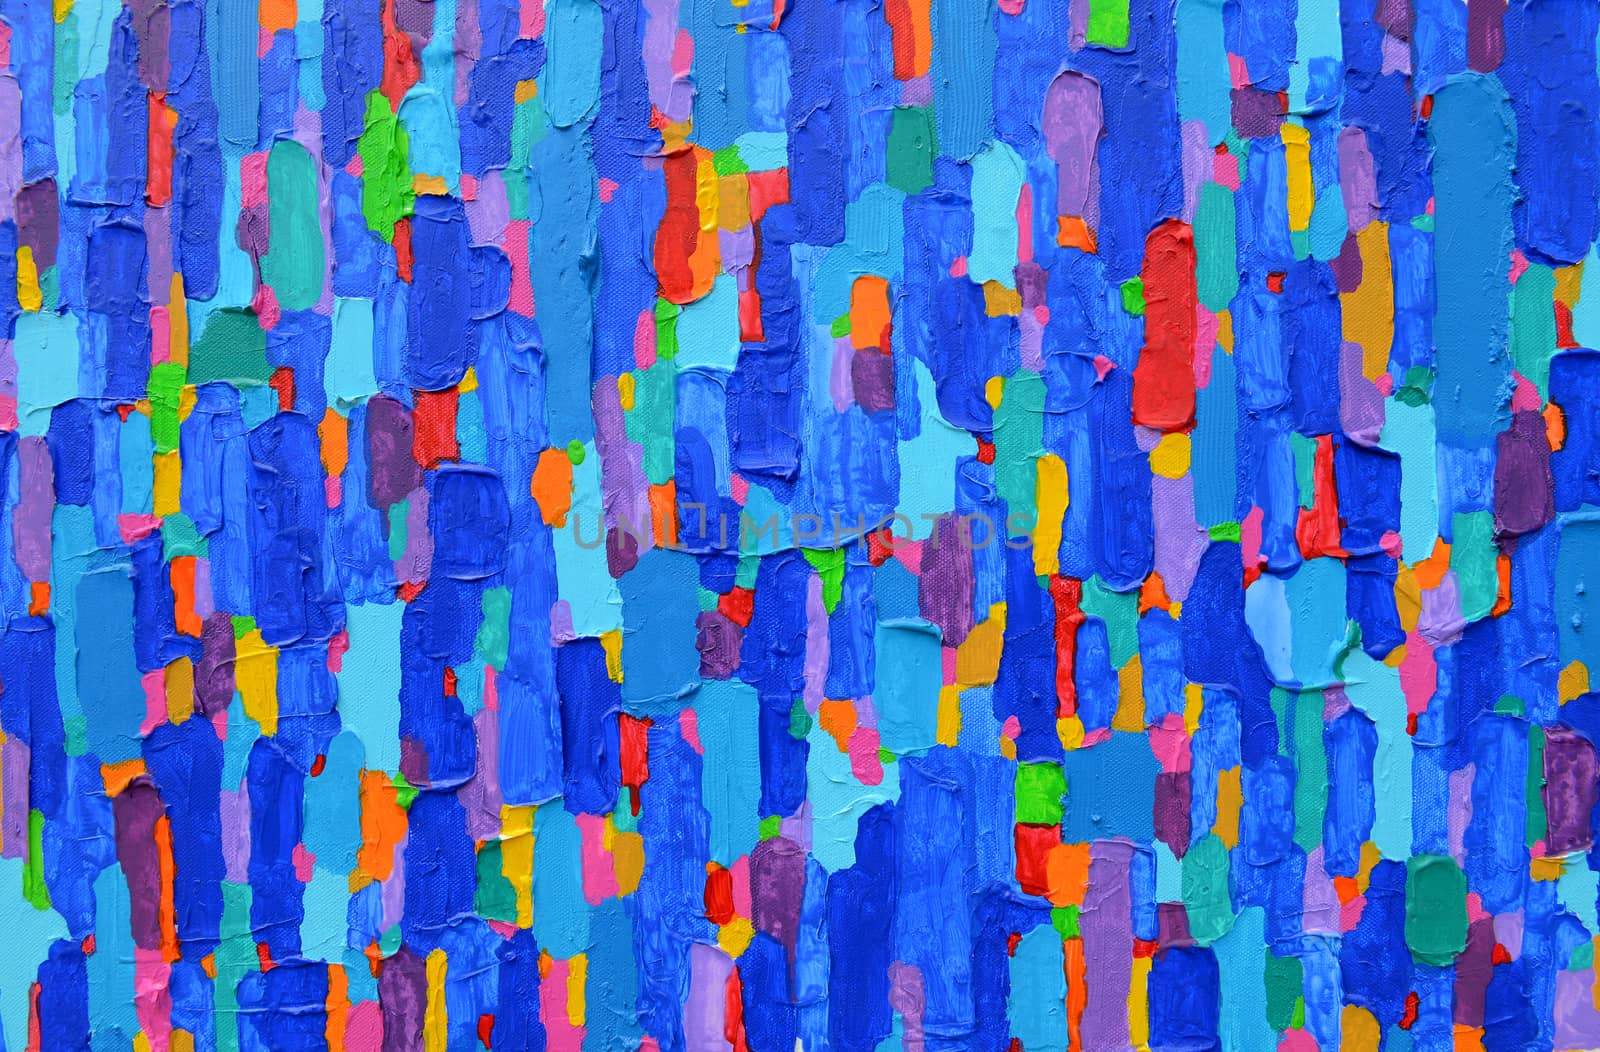 Texture, background and Colorful Image of an original Abstract Painting on Canvas.